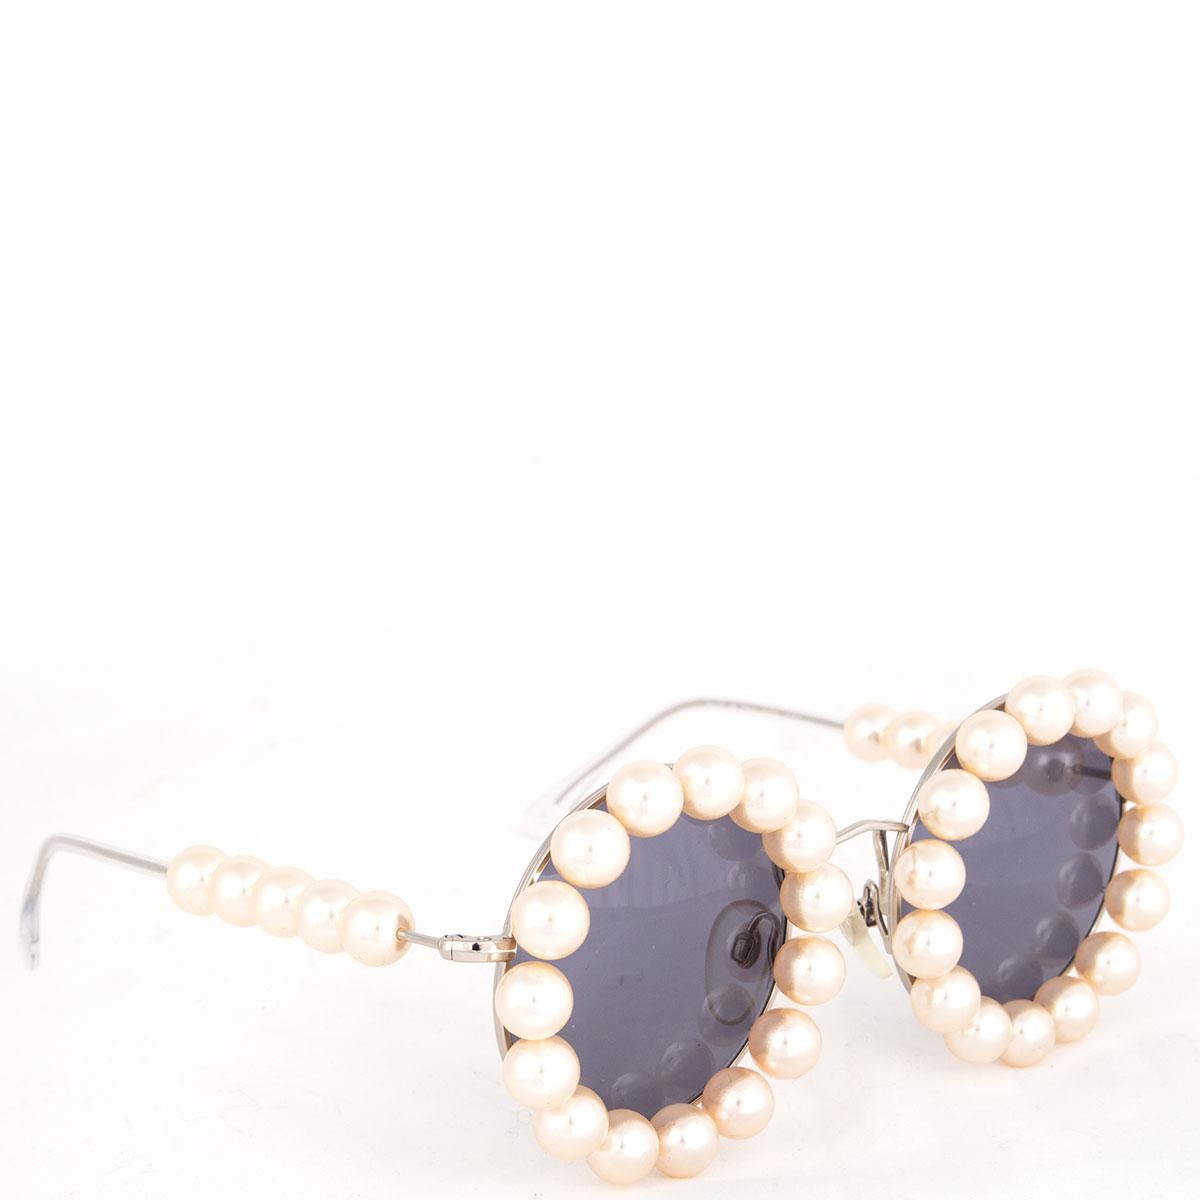 Retro Chanel Pearl Sunglasses - 11 For Sale on 1stDibs